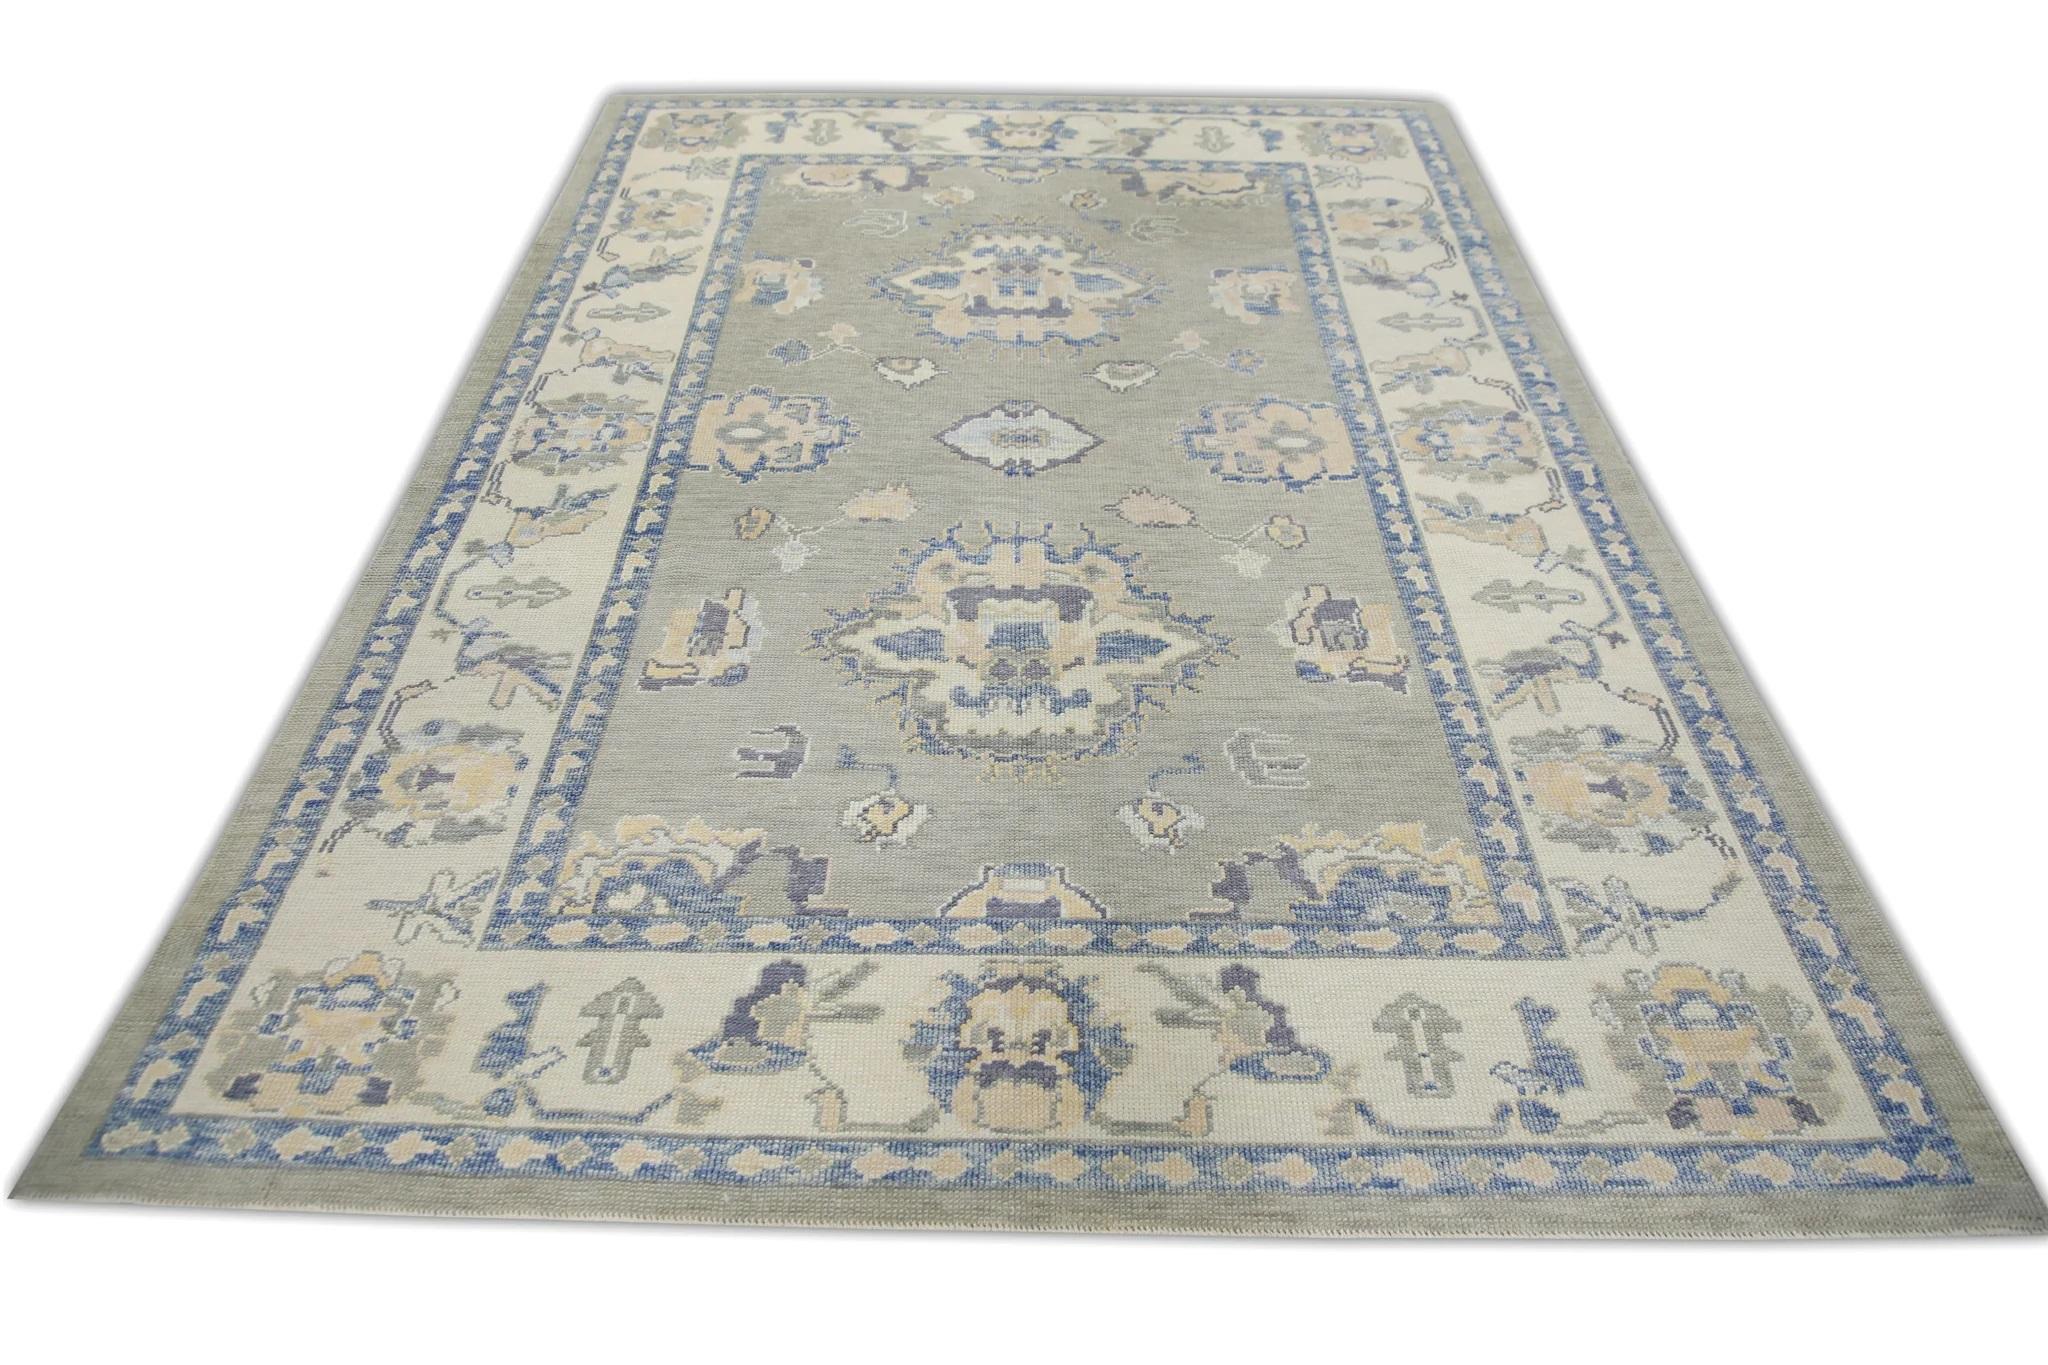 Green and Blue Floral Handwoven Wool Turkish Oushak Rug 6' x 8'4